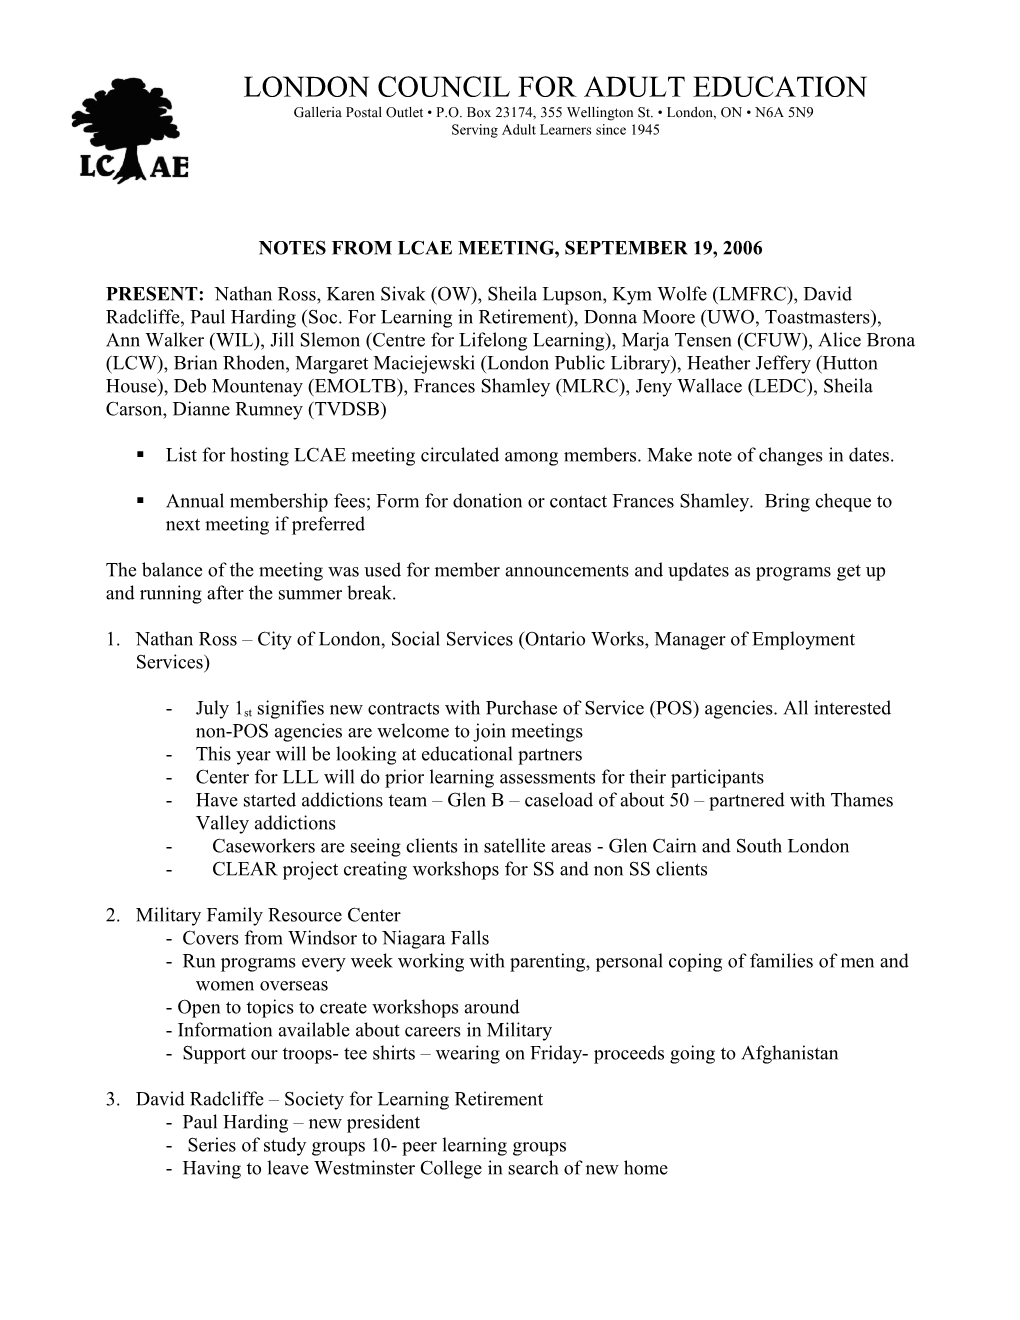 Notes from Lcae Meeting, September 19, 2006